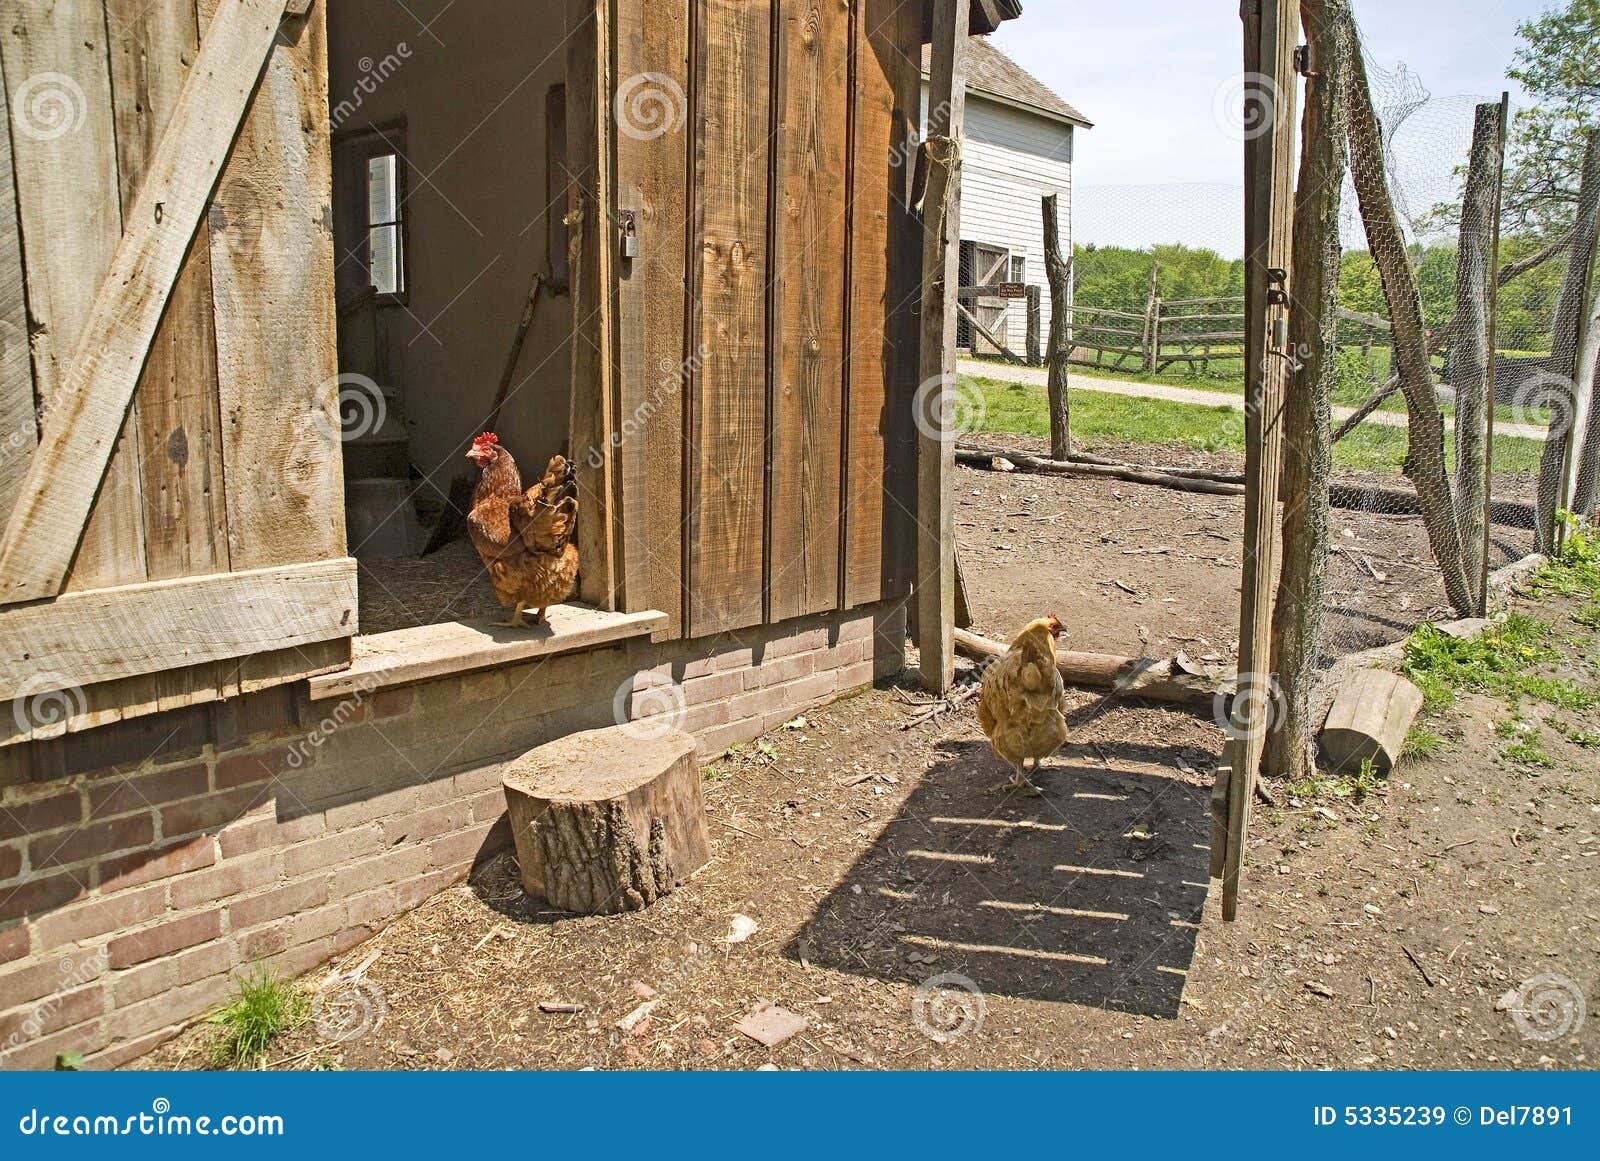 Chickens outside chicken coop, Bailey farm, dunes state park.